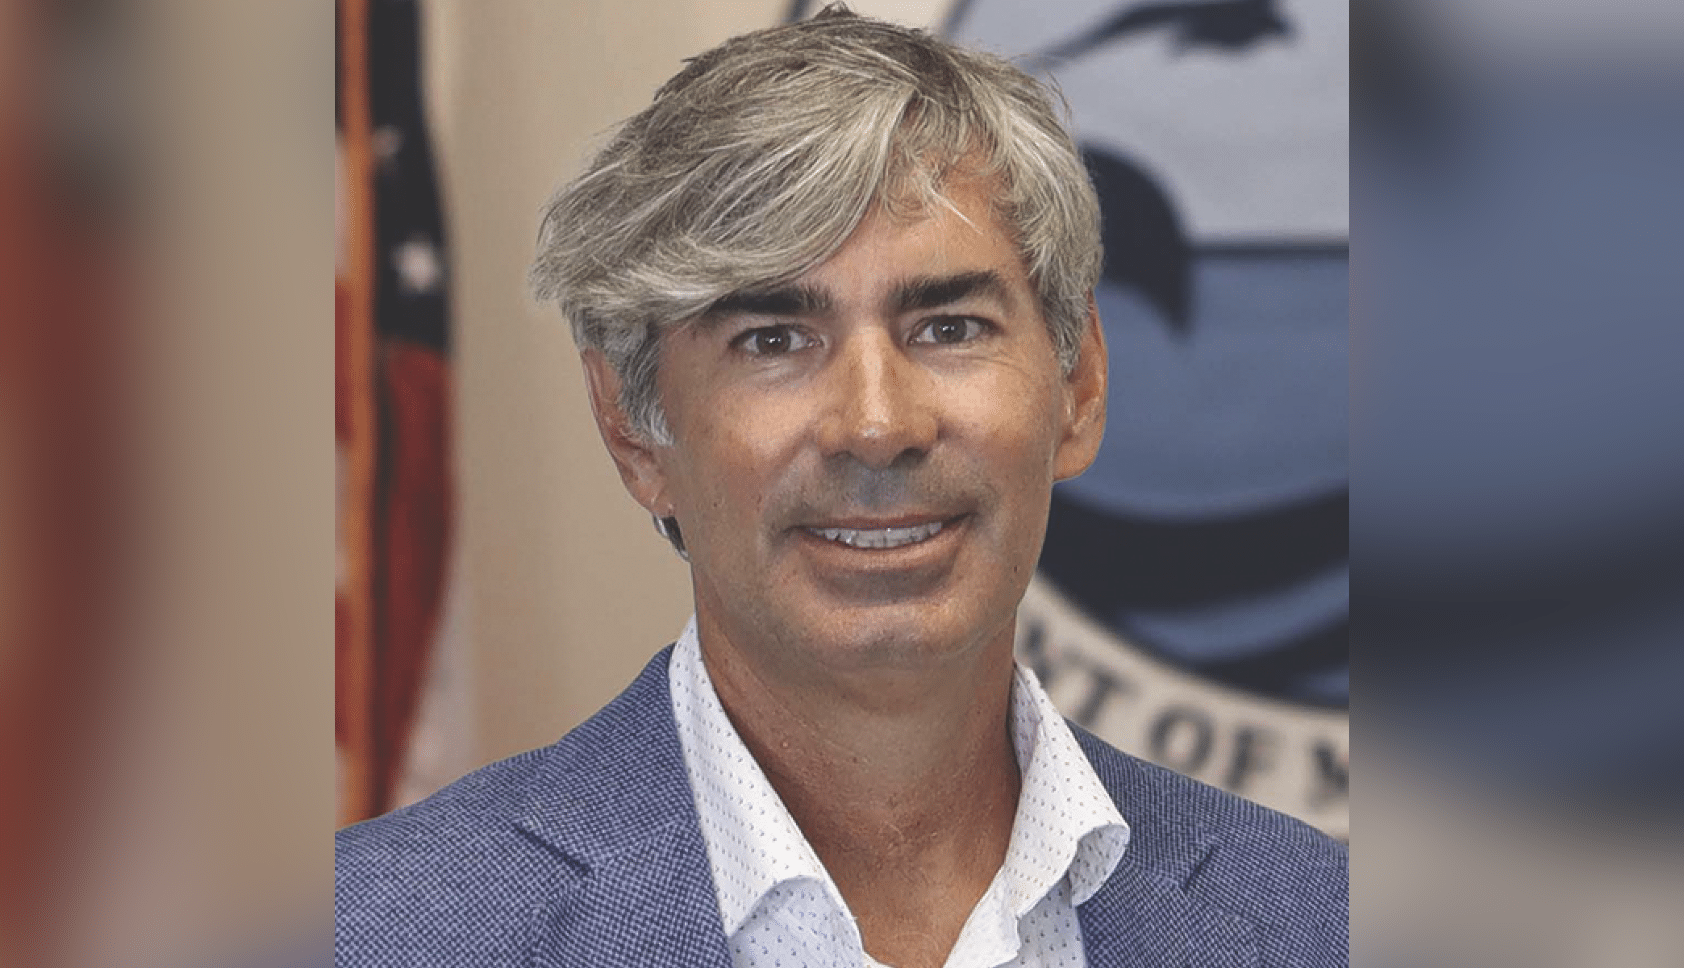 Mayfield appointed to Mississippi Advisory Commission on Marine Resources – SuperTalk Mississippi